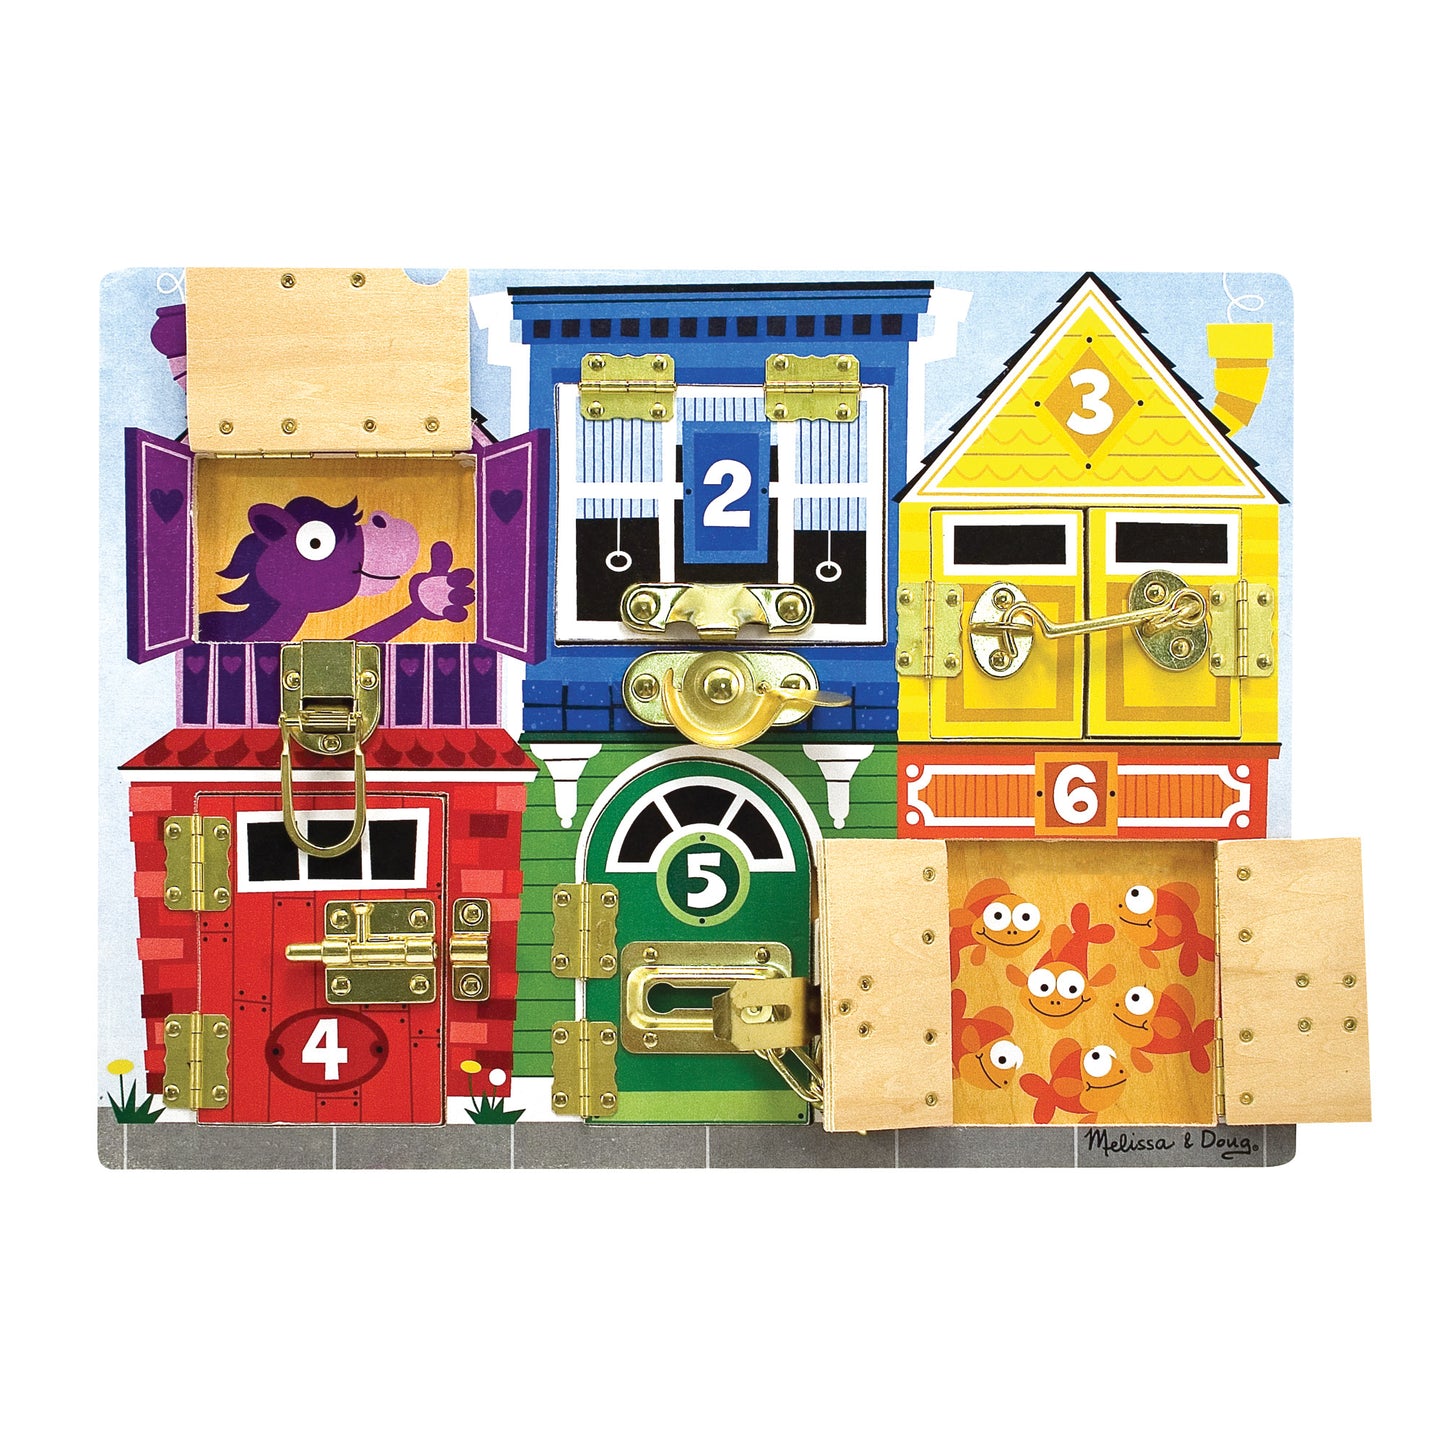 Latches Wooden Activity Board